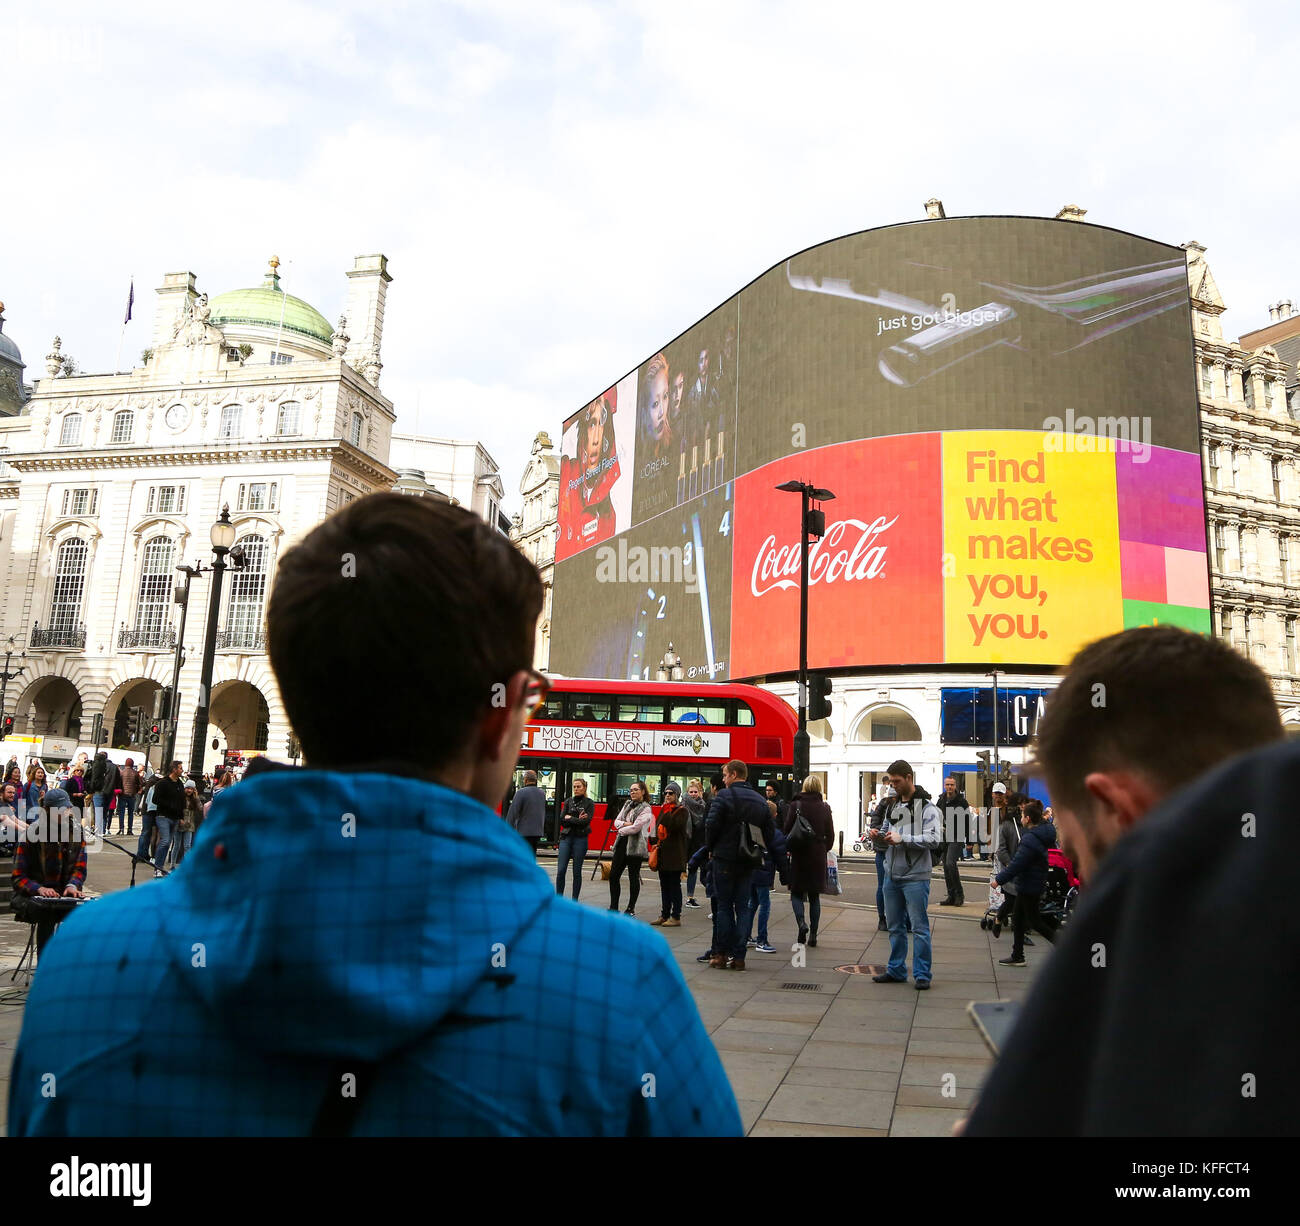 Piccadilly Circus. London. UK 28 Oct 2017 - Tourists in Piccadilly Circus on a sunny but cold day as Britain says goodbye to British Summer Time (BST) and welcomes back Greenwich Mean Time (GMT) for the winter when the clocks go back at 2am on Sunday 29 October 2017 Credit: Dinendra Haria/Alamy Live News Stock Photo